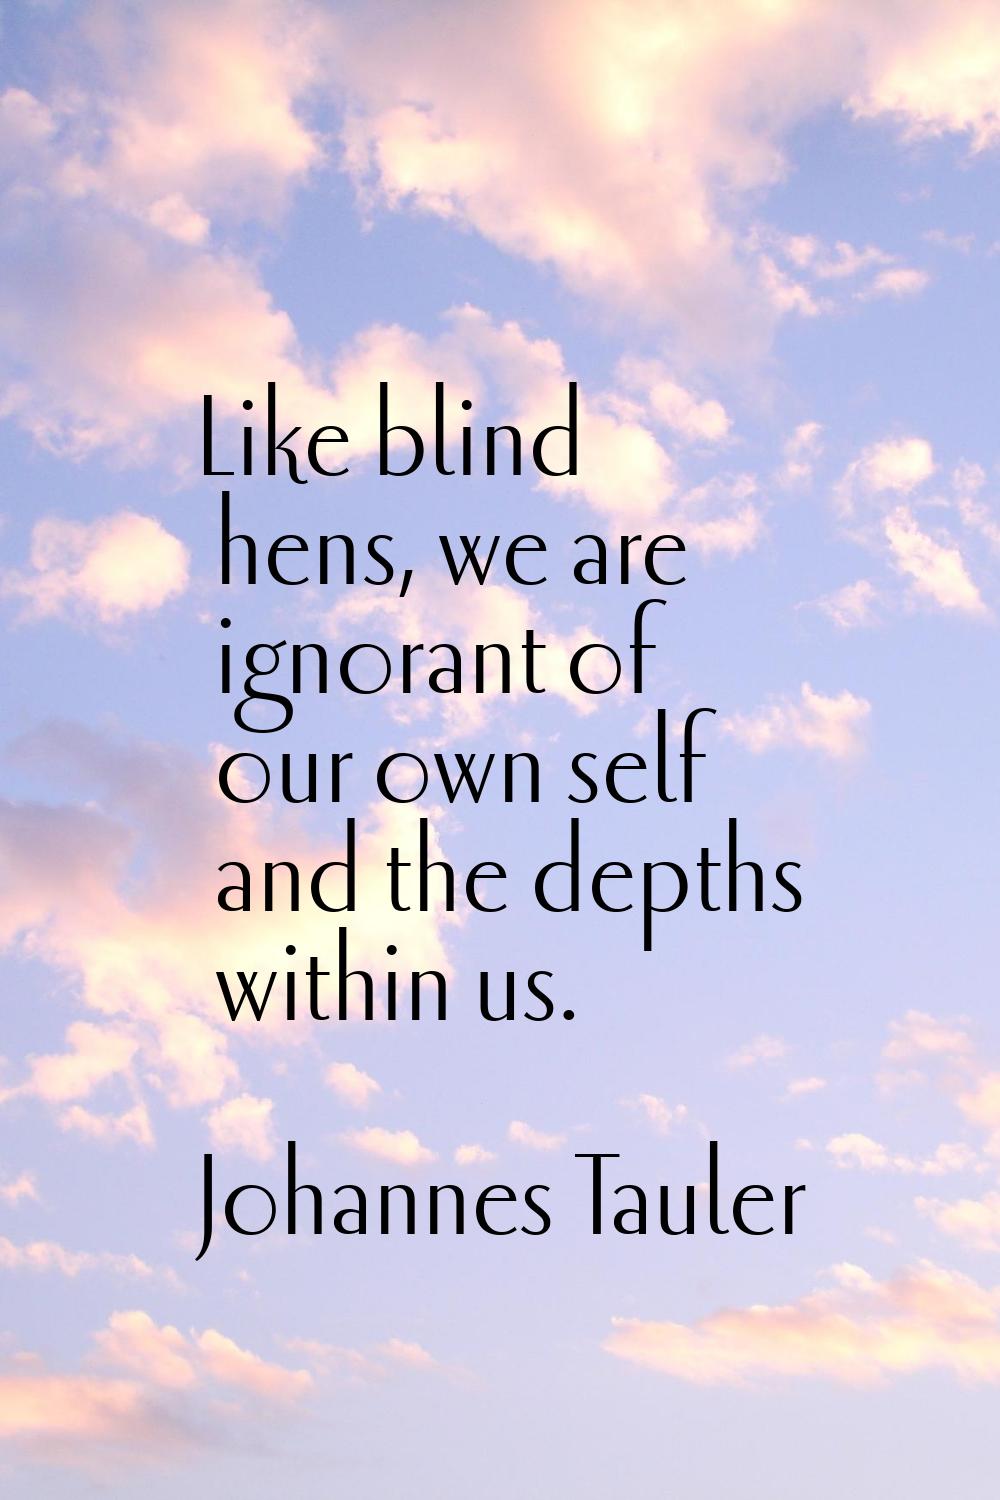 Like blind hens, we are ignorant of our own self and the depths within us.